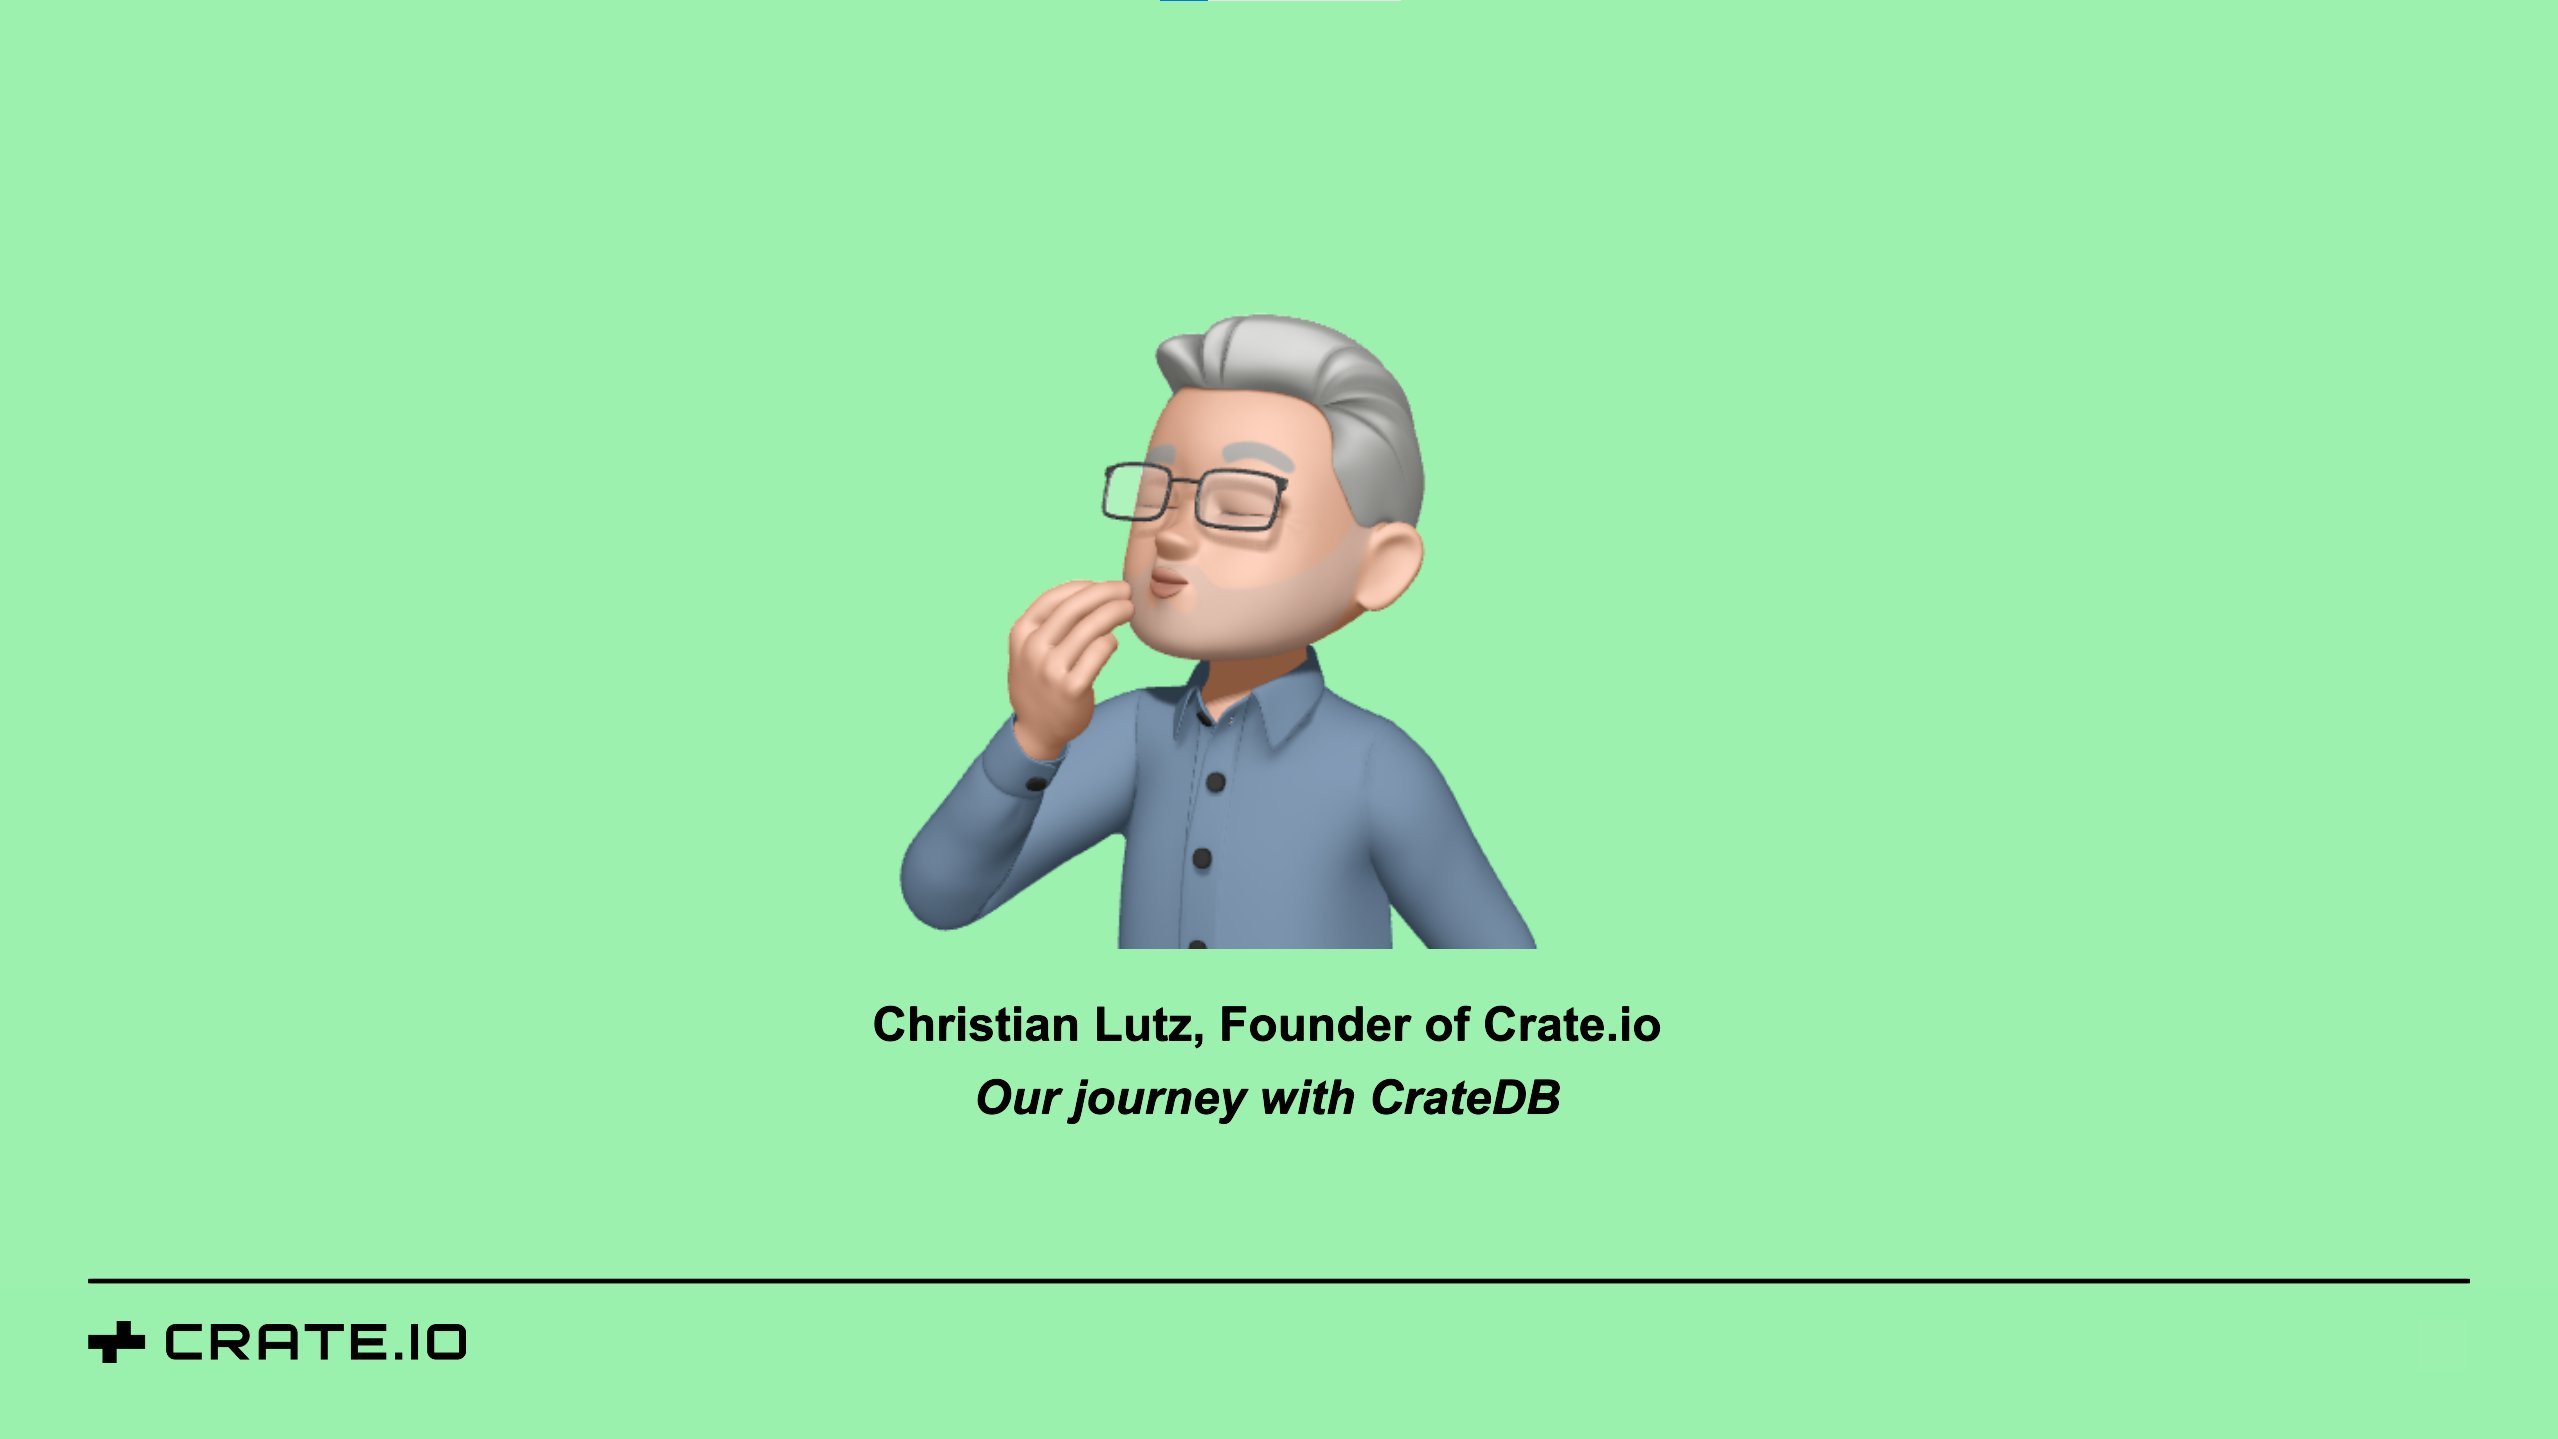 Our Journey with CrateDB